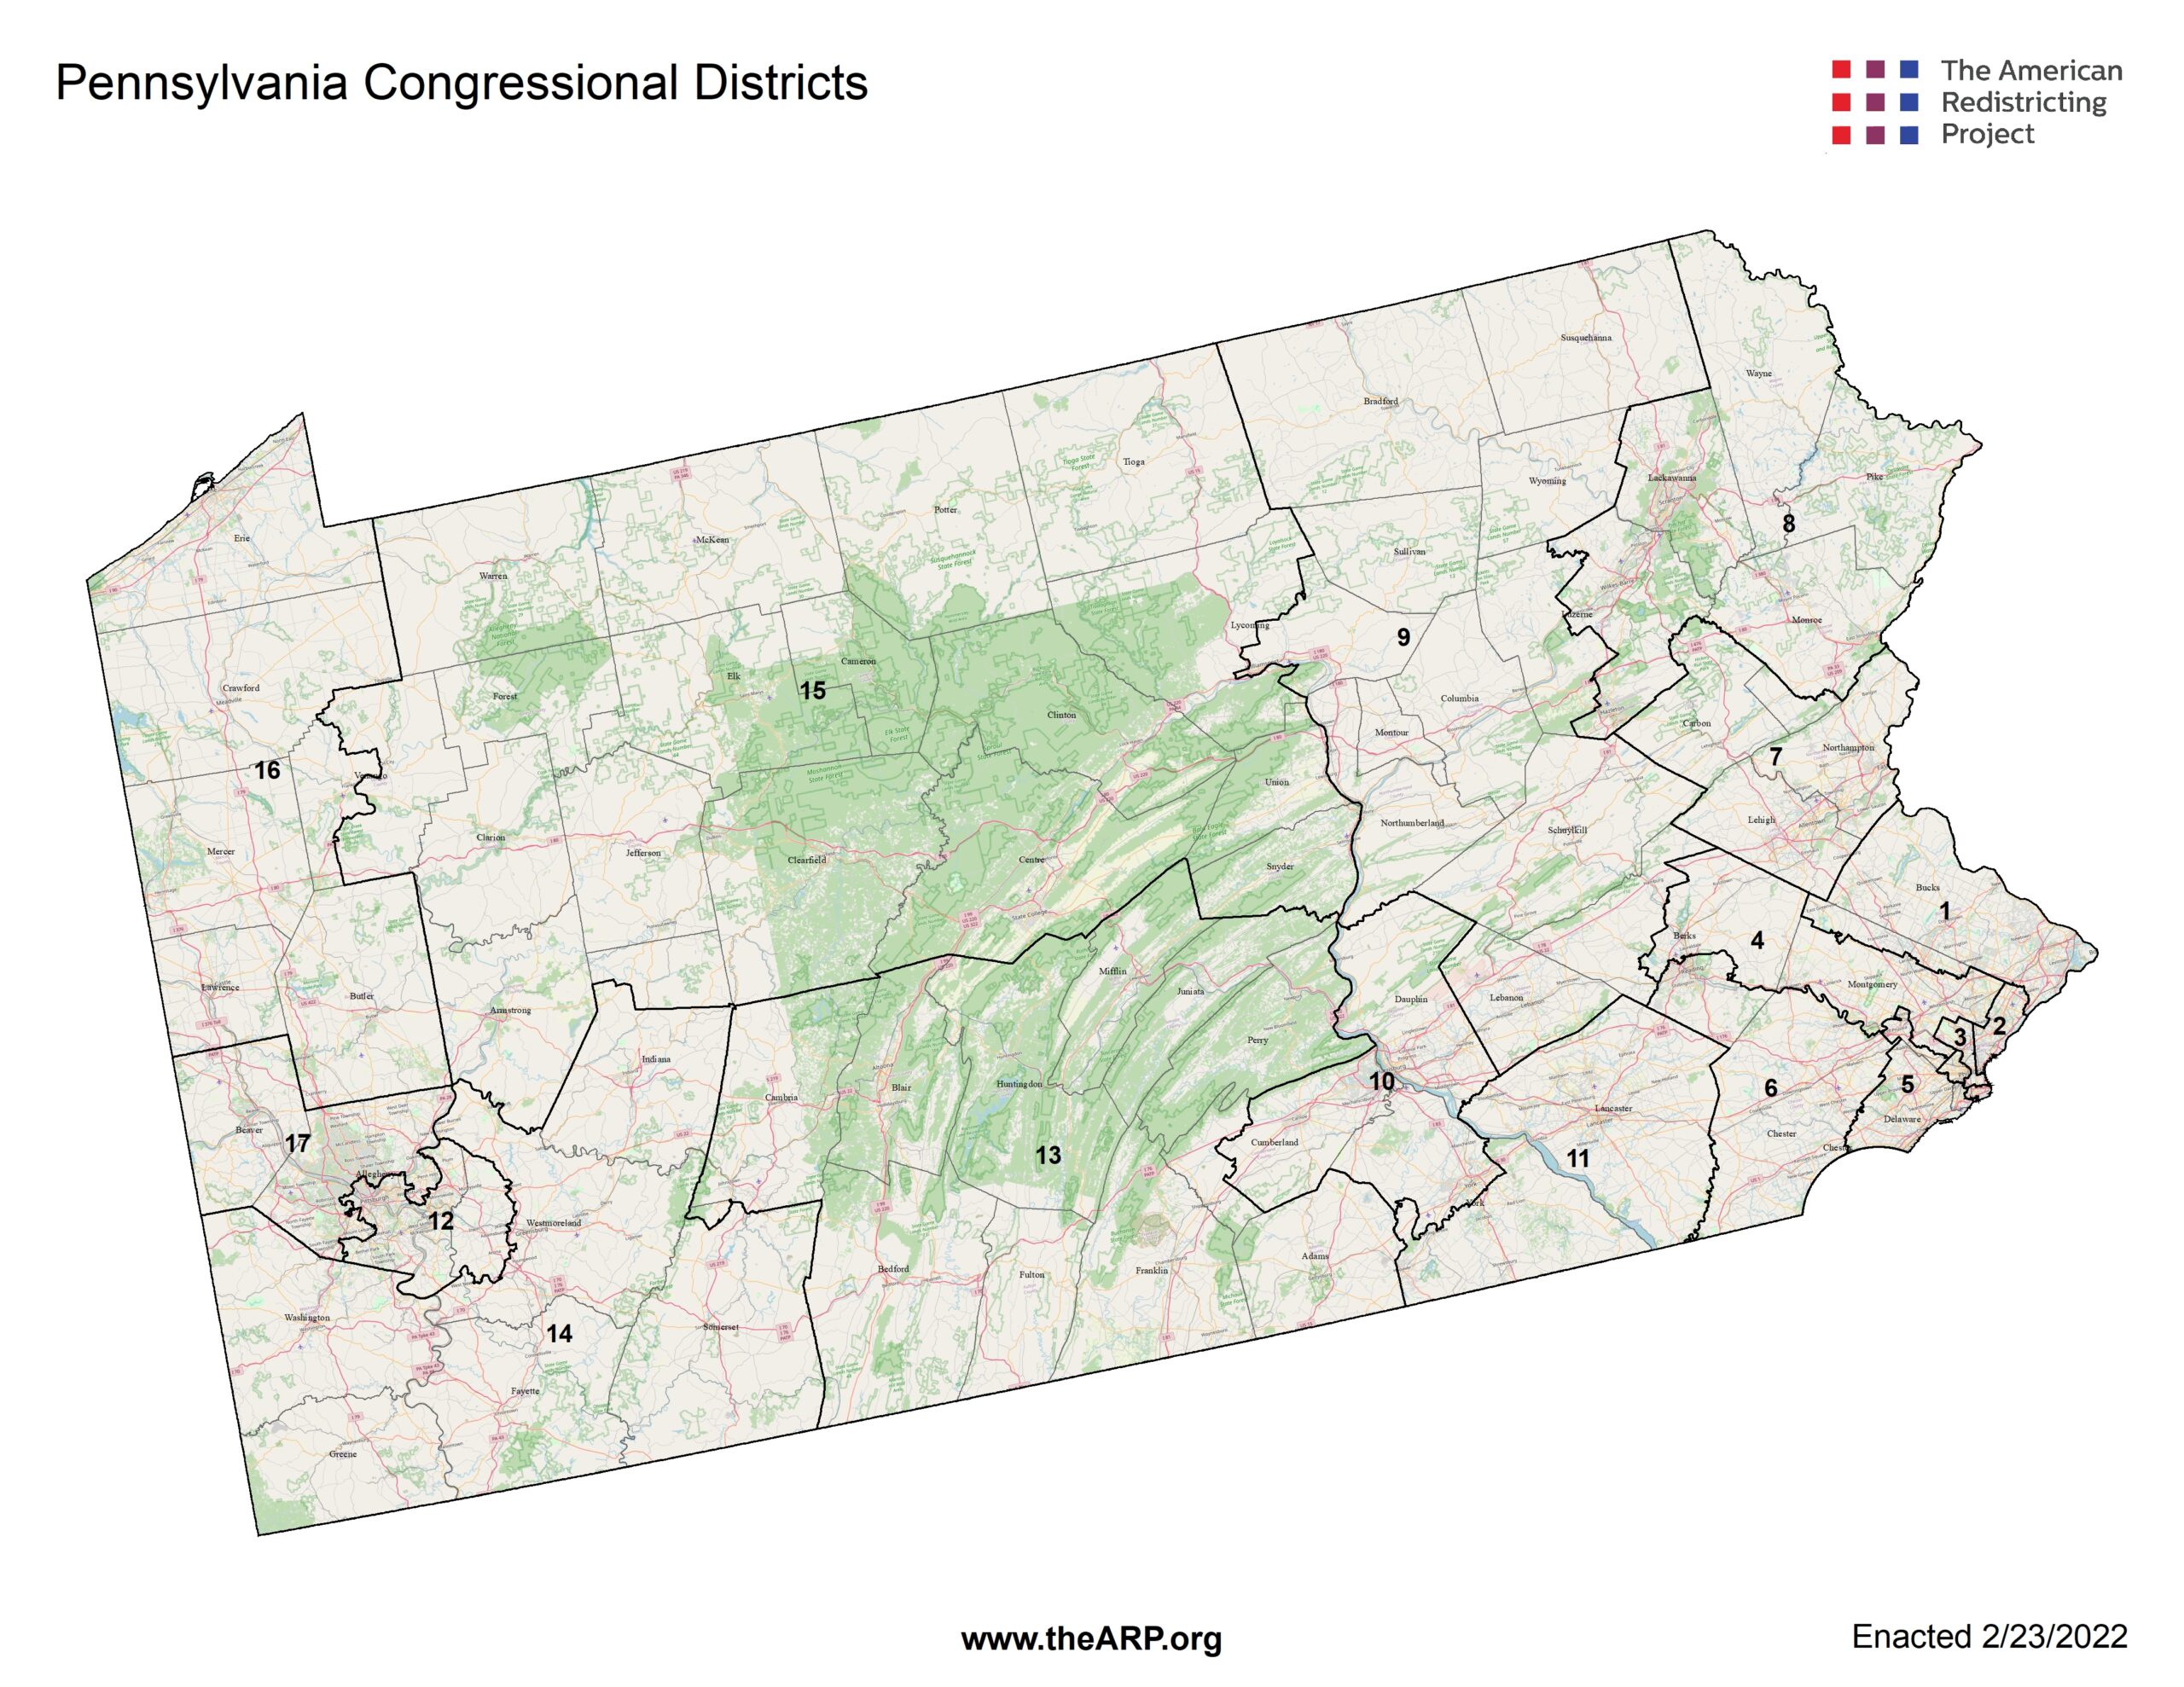 Pennsylvania - The American Redistricting Project